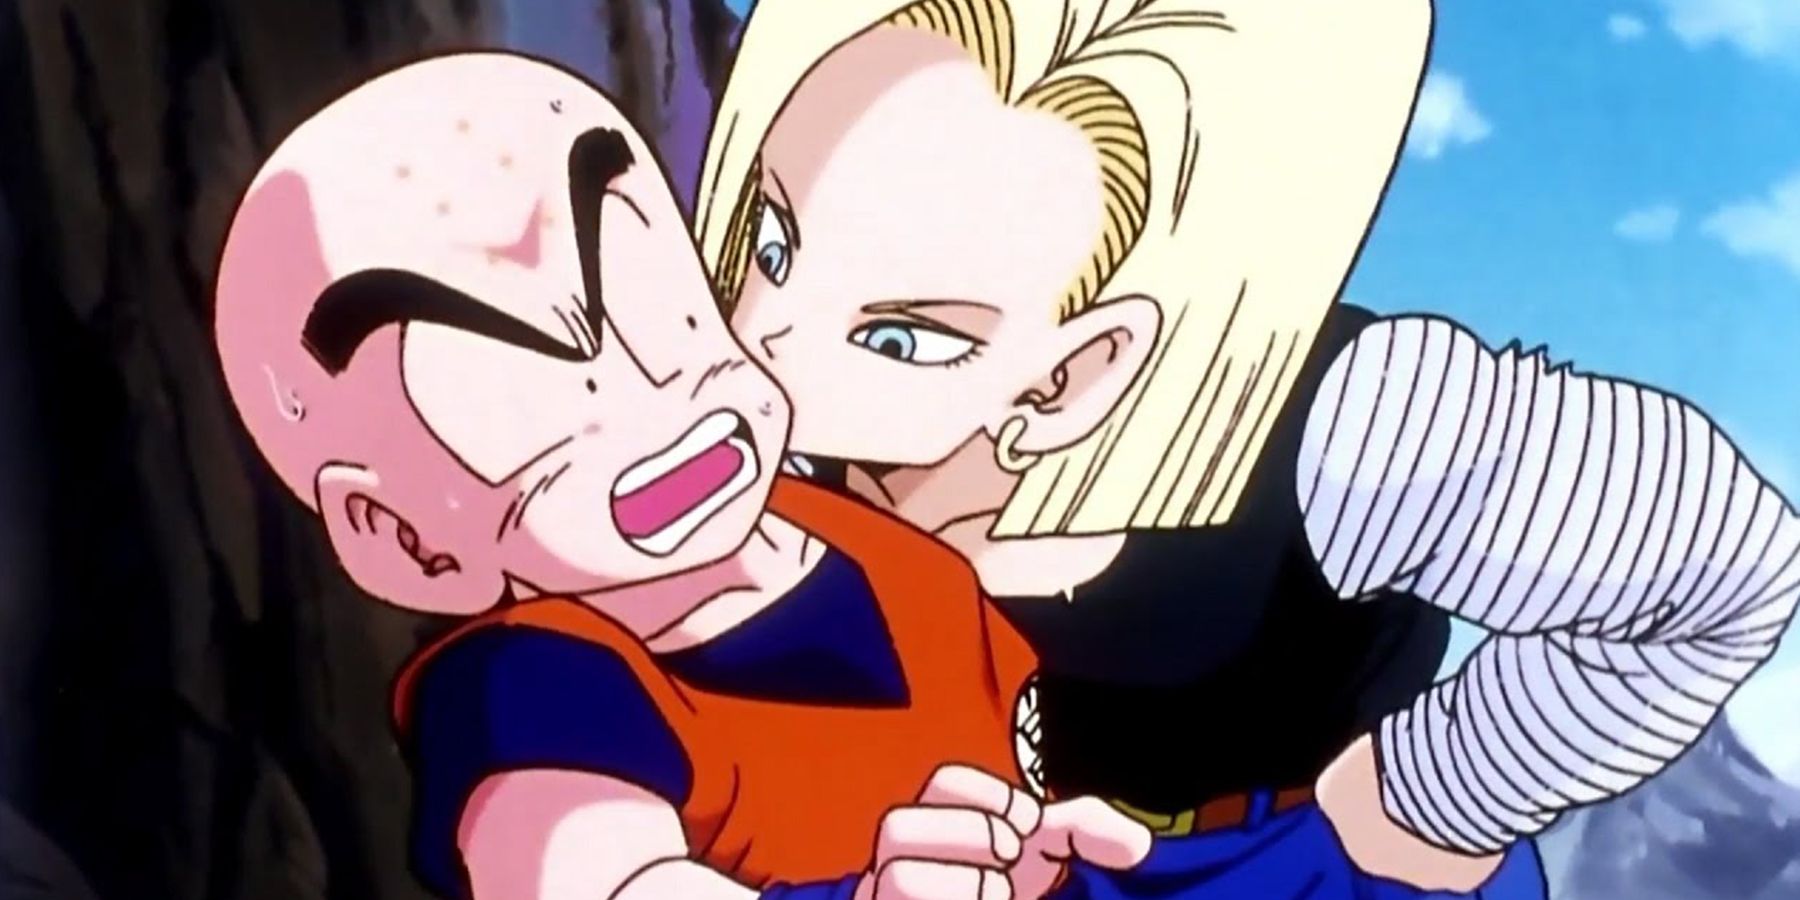 Android 18 kisses Krillin to mess with him in Dragon Ball Z.